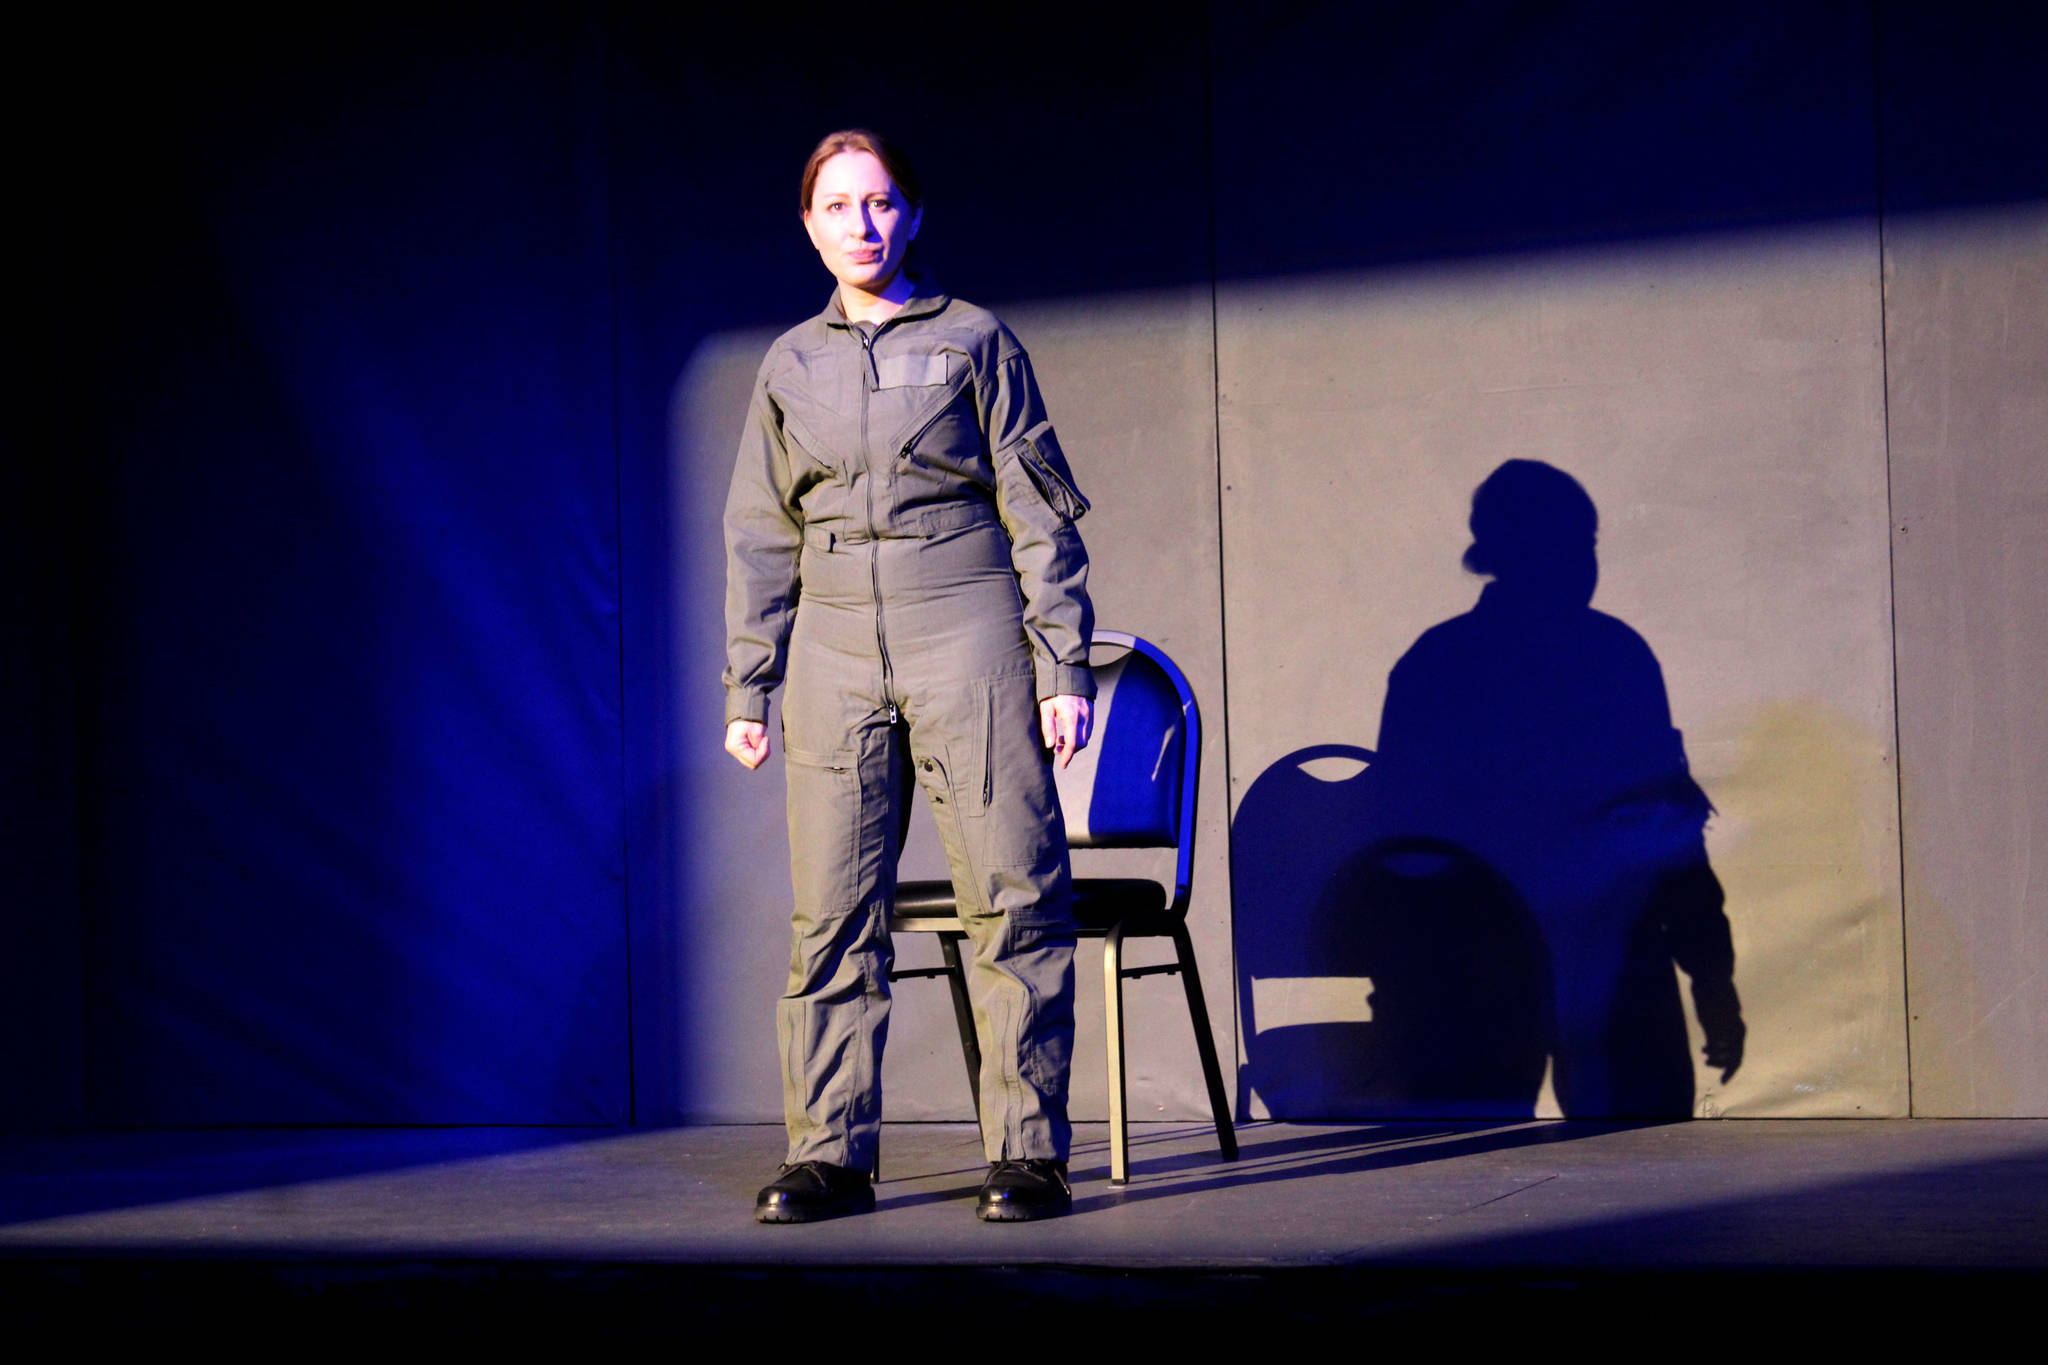 AnnMarie Rudstrom portrays The Pilot during a rehearsal of "Grounded" at the Kenai Performers' black box theater on Monday, March 15 in Soldotna, Alaska. (Ashlyn O'Hara/Peninsula Clarion)